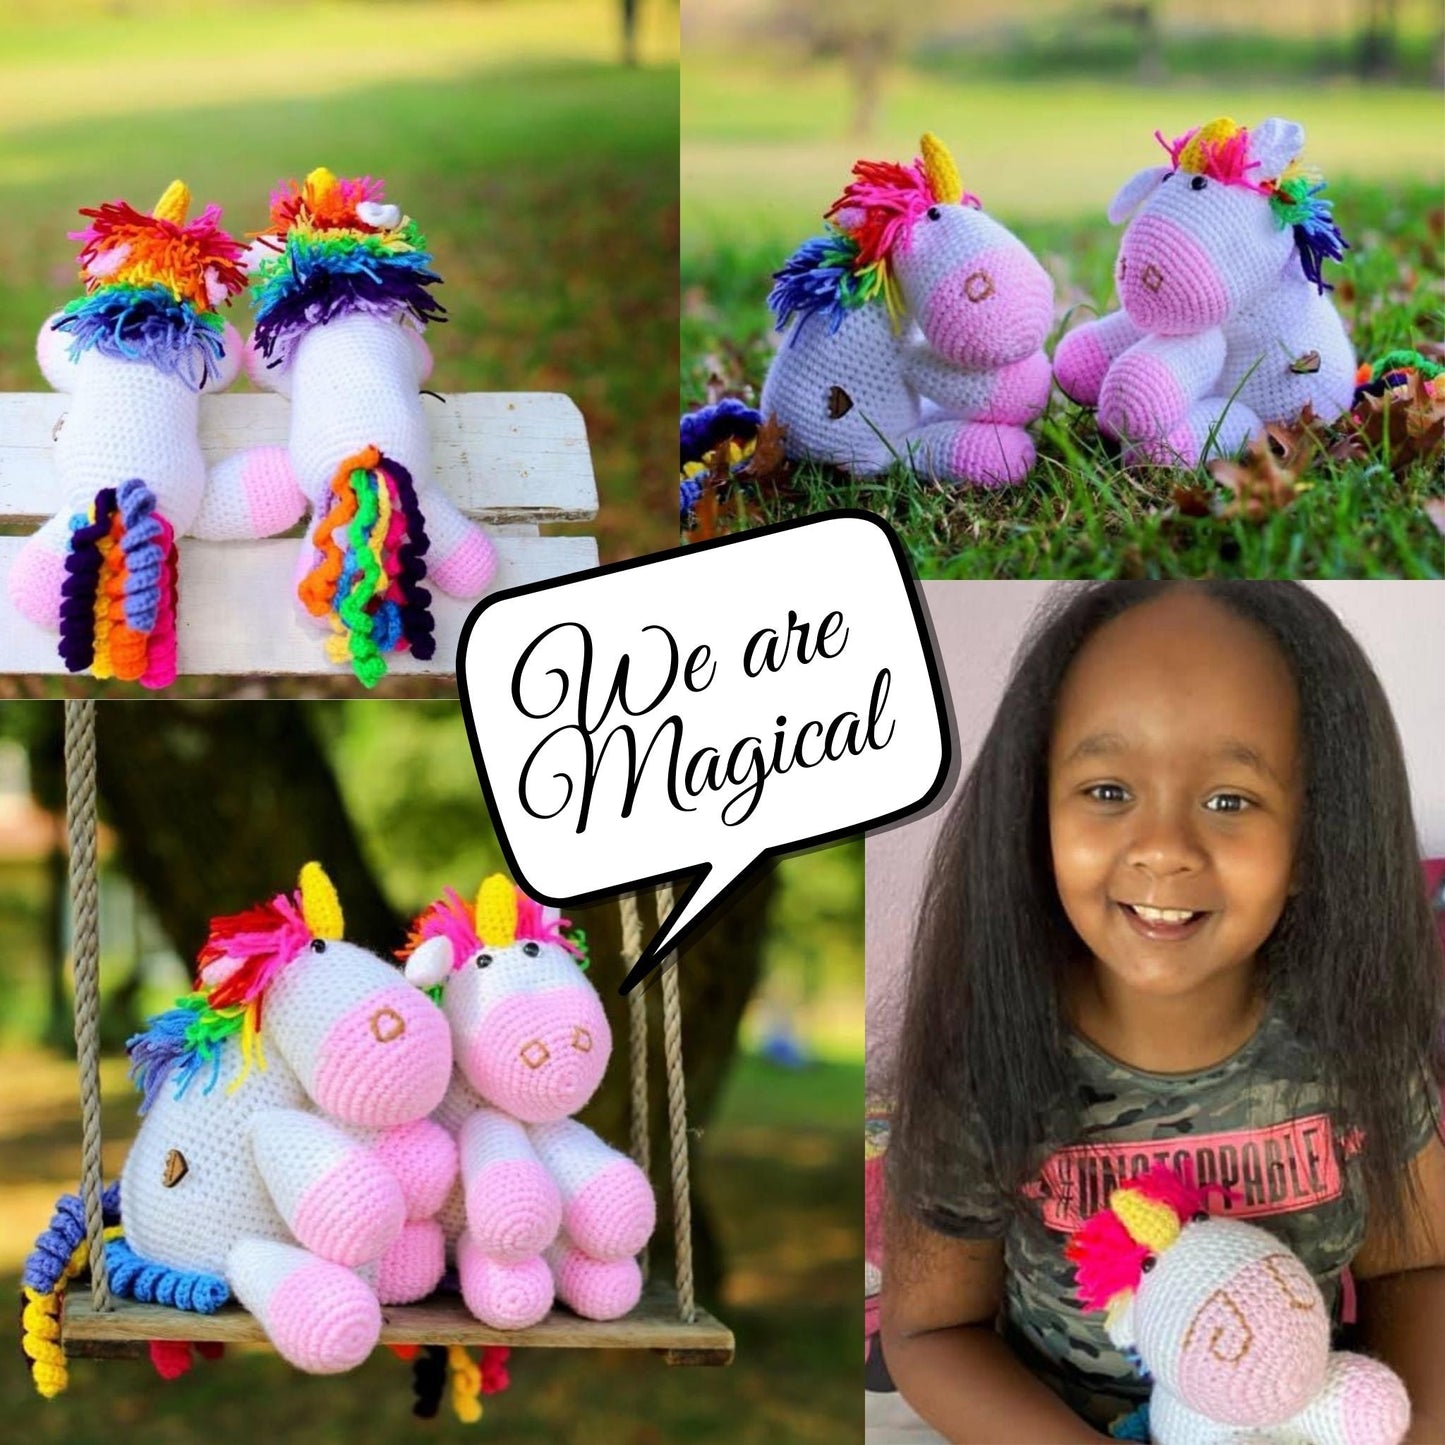 Unicorn - Handmade in South Africa by the ladies from Rare Bears Charity